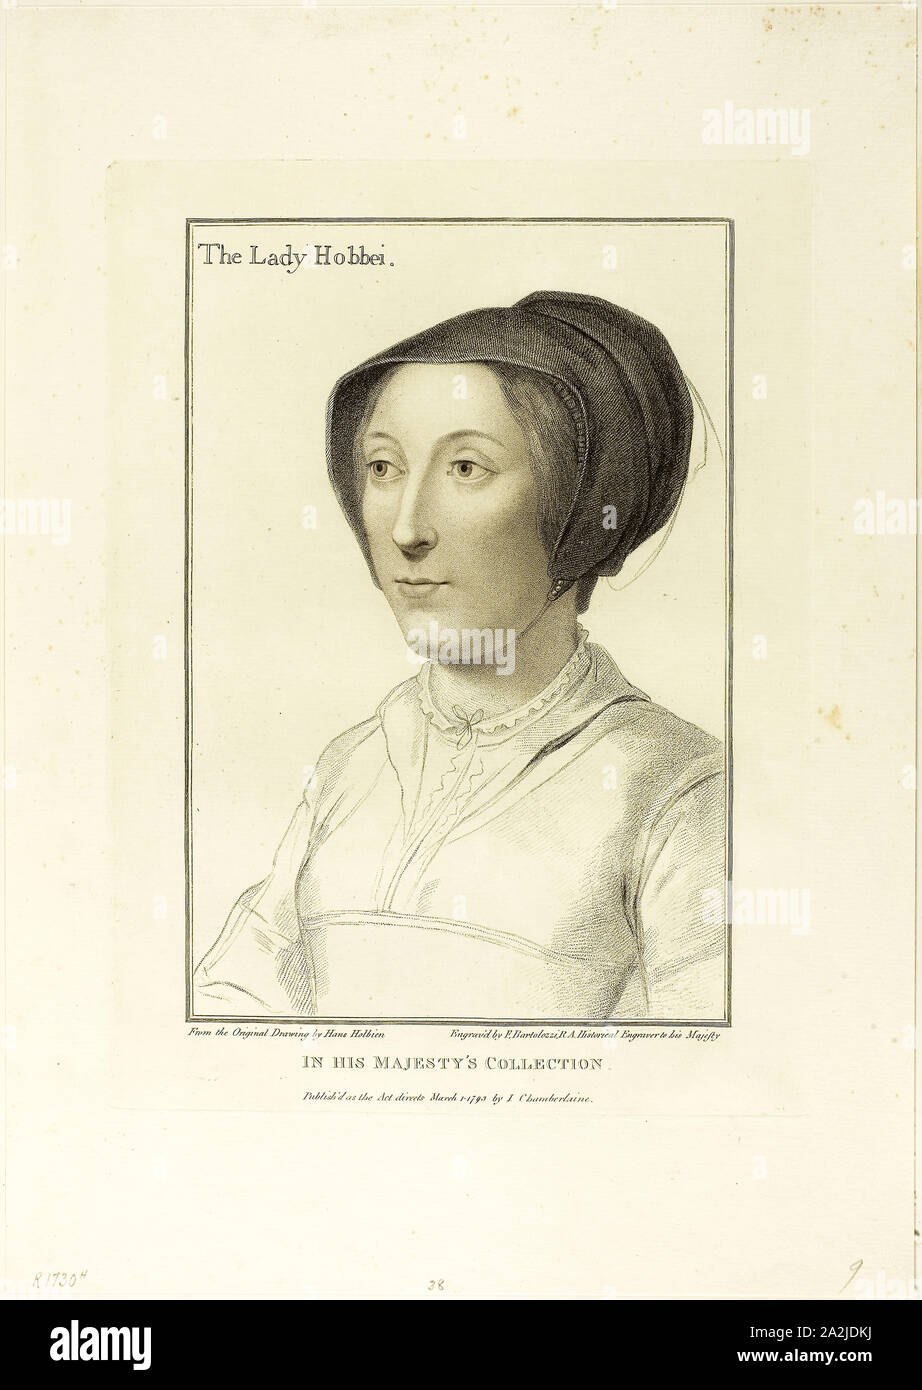 Lady Hobby, March 1, 1793, Francesco Bartolozzi (Italian, 1727-1815), after Hans Holbein the younger (German, 1497-1543), Italy, Stipple engraving on ivory wove paper, 289 x 197 mm (image), 343 x 255 mm (plate), 463 x 327 mm (sheet Stock Photo